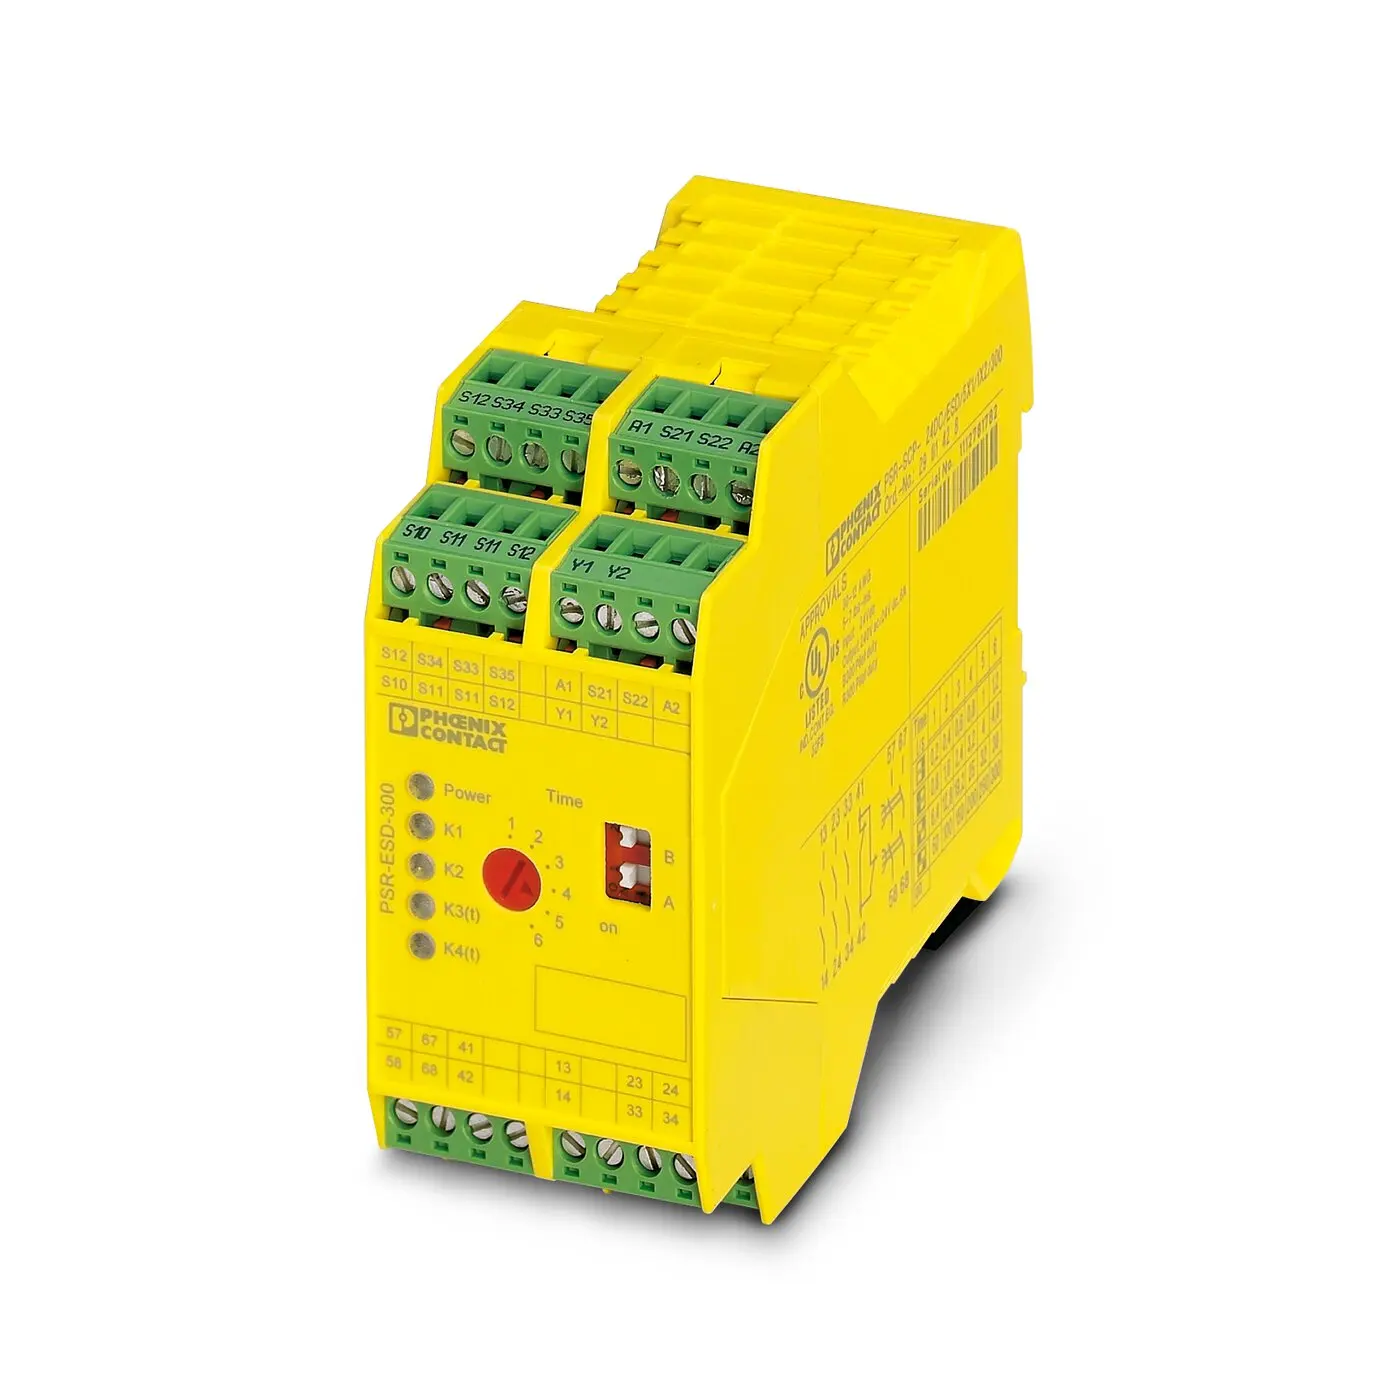 

2981428 PSR-SCP-24DC/ESD/5X1/1X2/300 Phoenix Contact Safety Relays